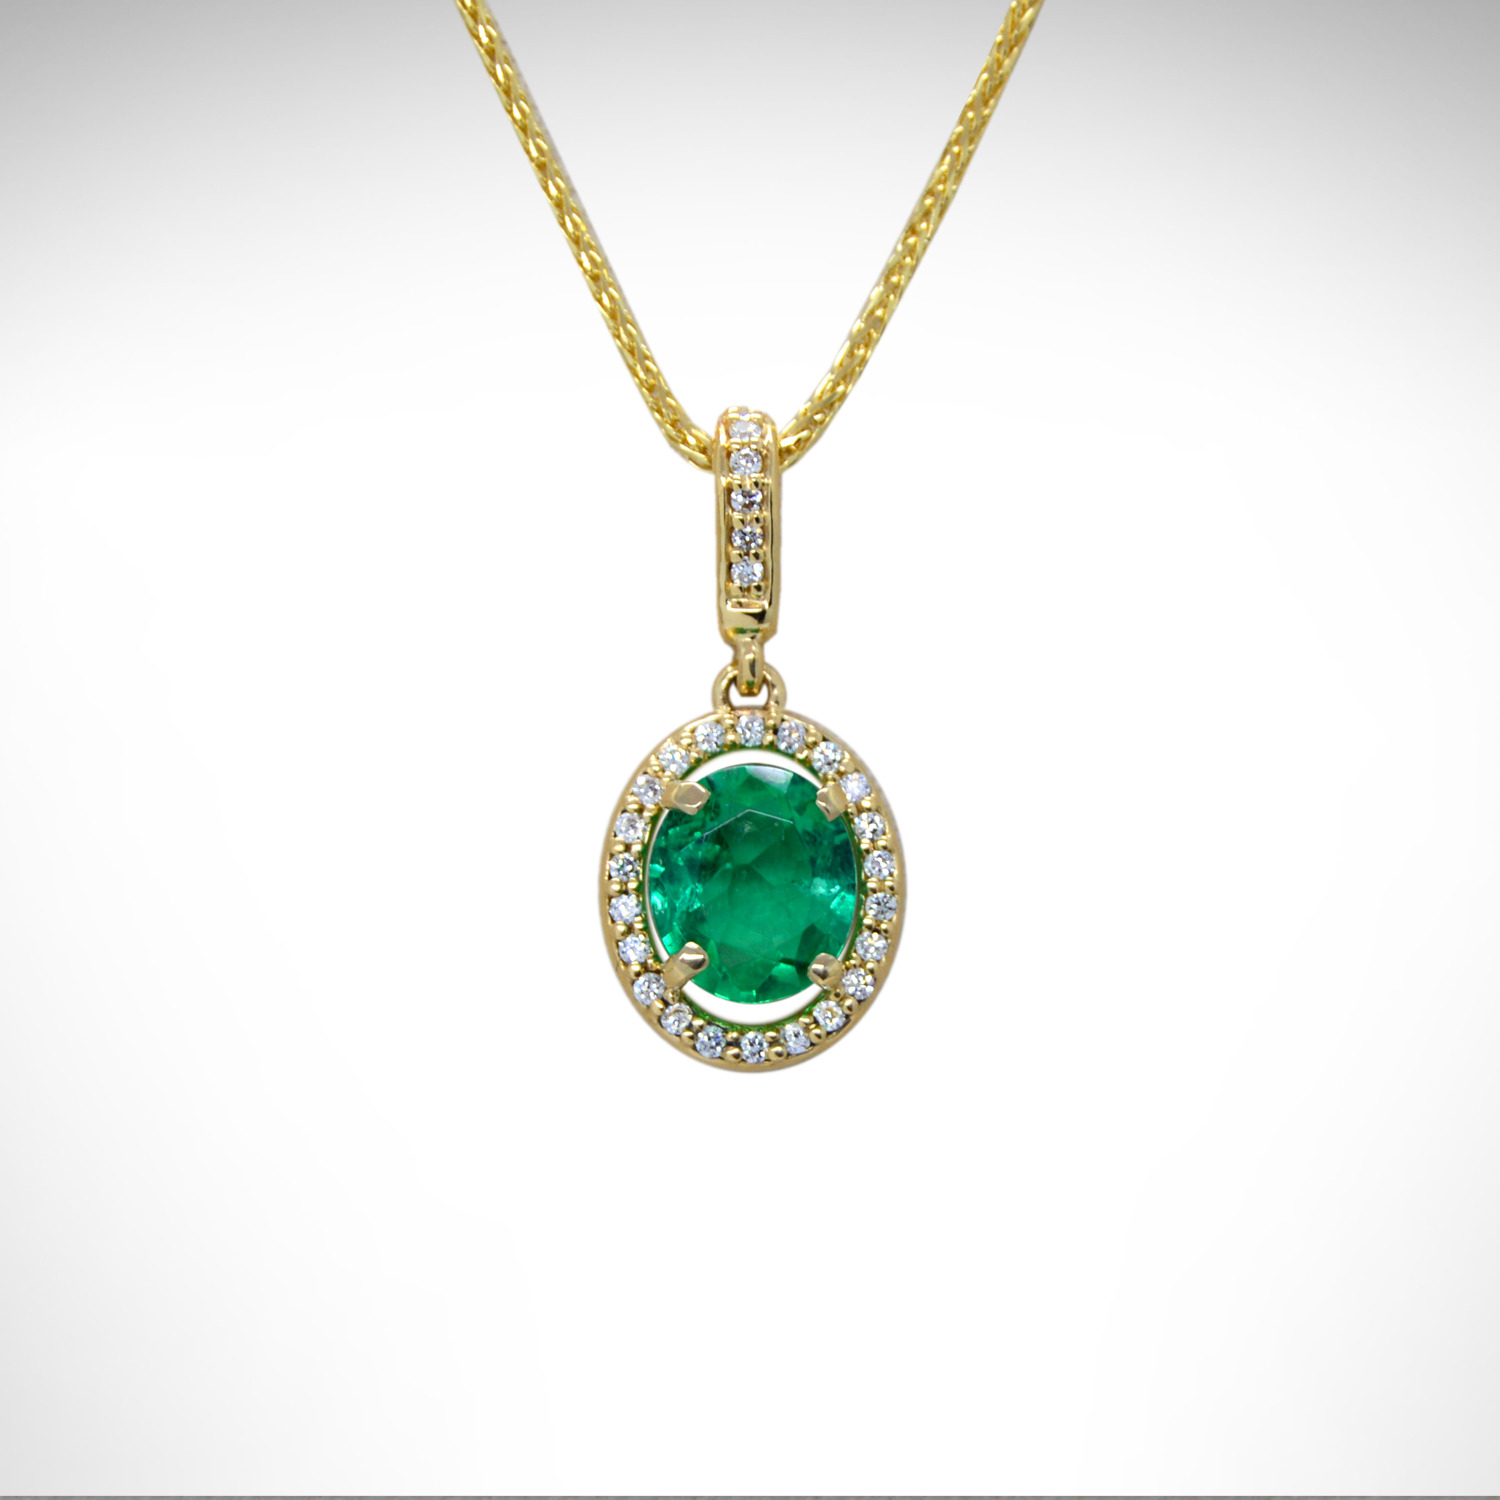 Natural Oval Emerald Real Diamond Pendant Necklace 14k Yellow Gold over Base 